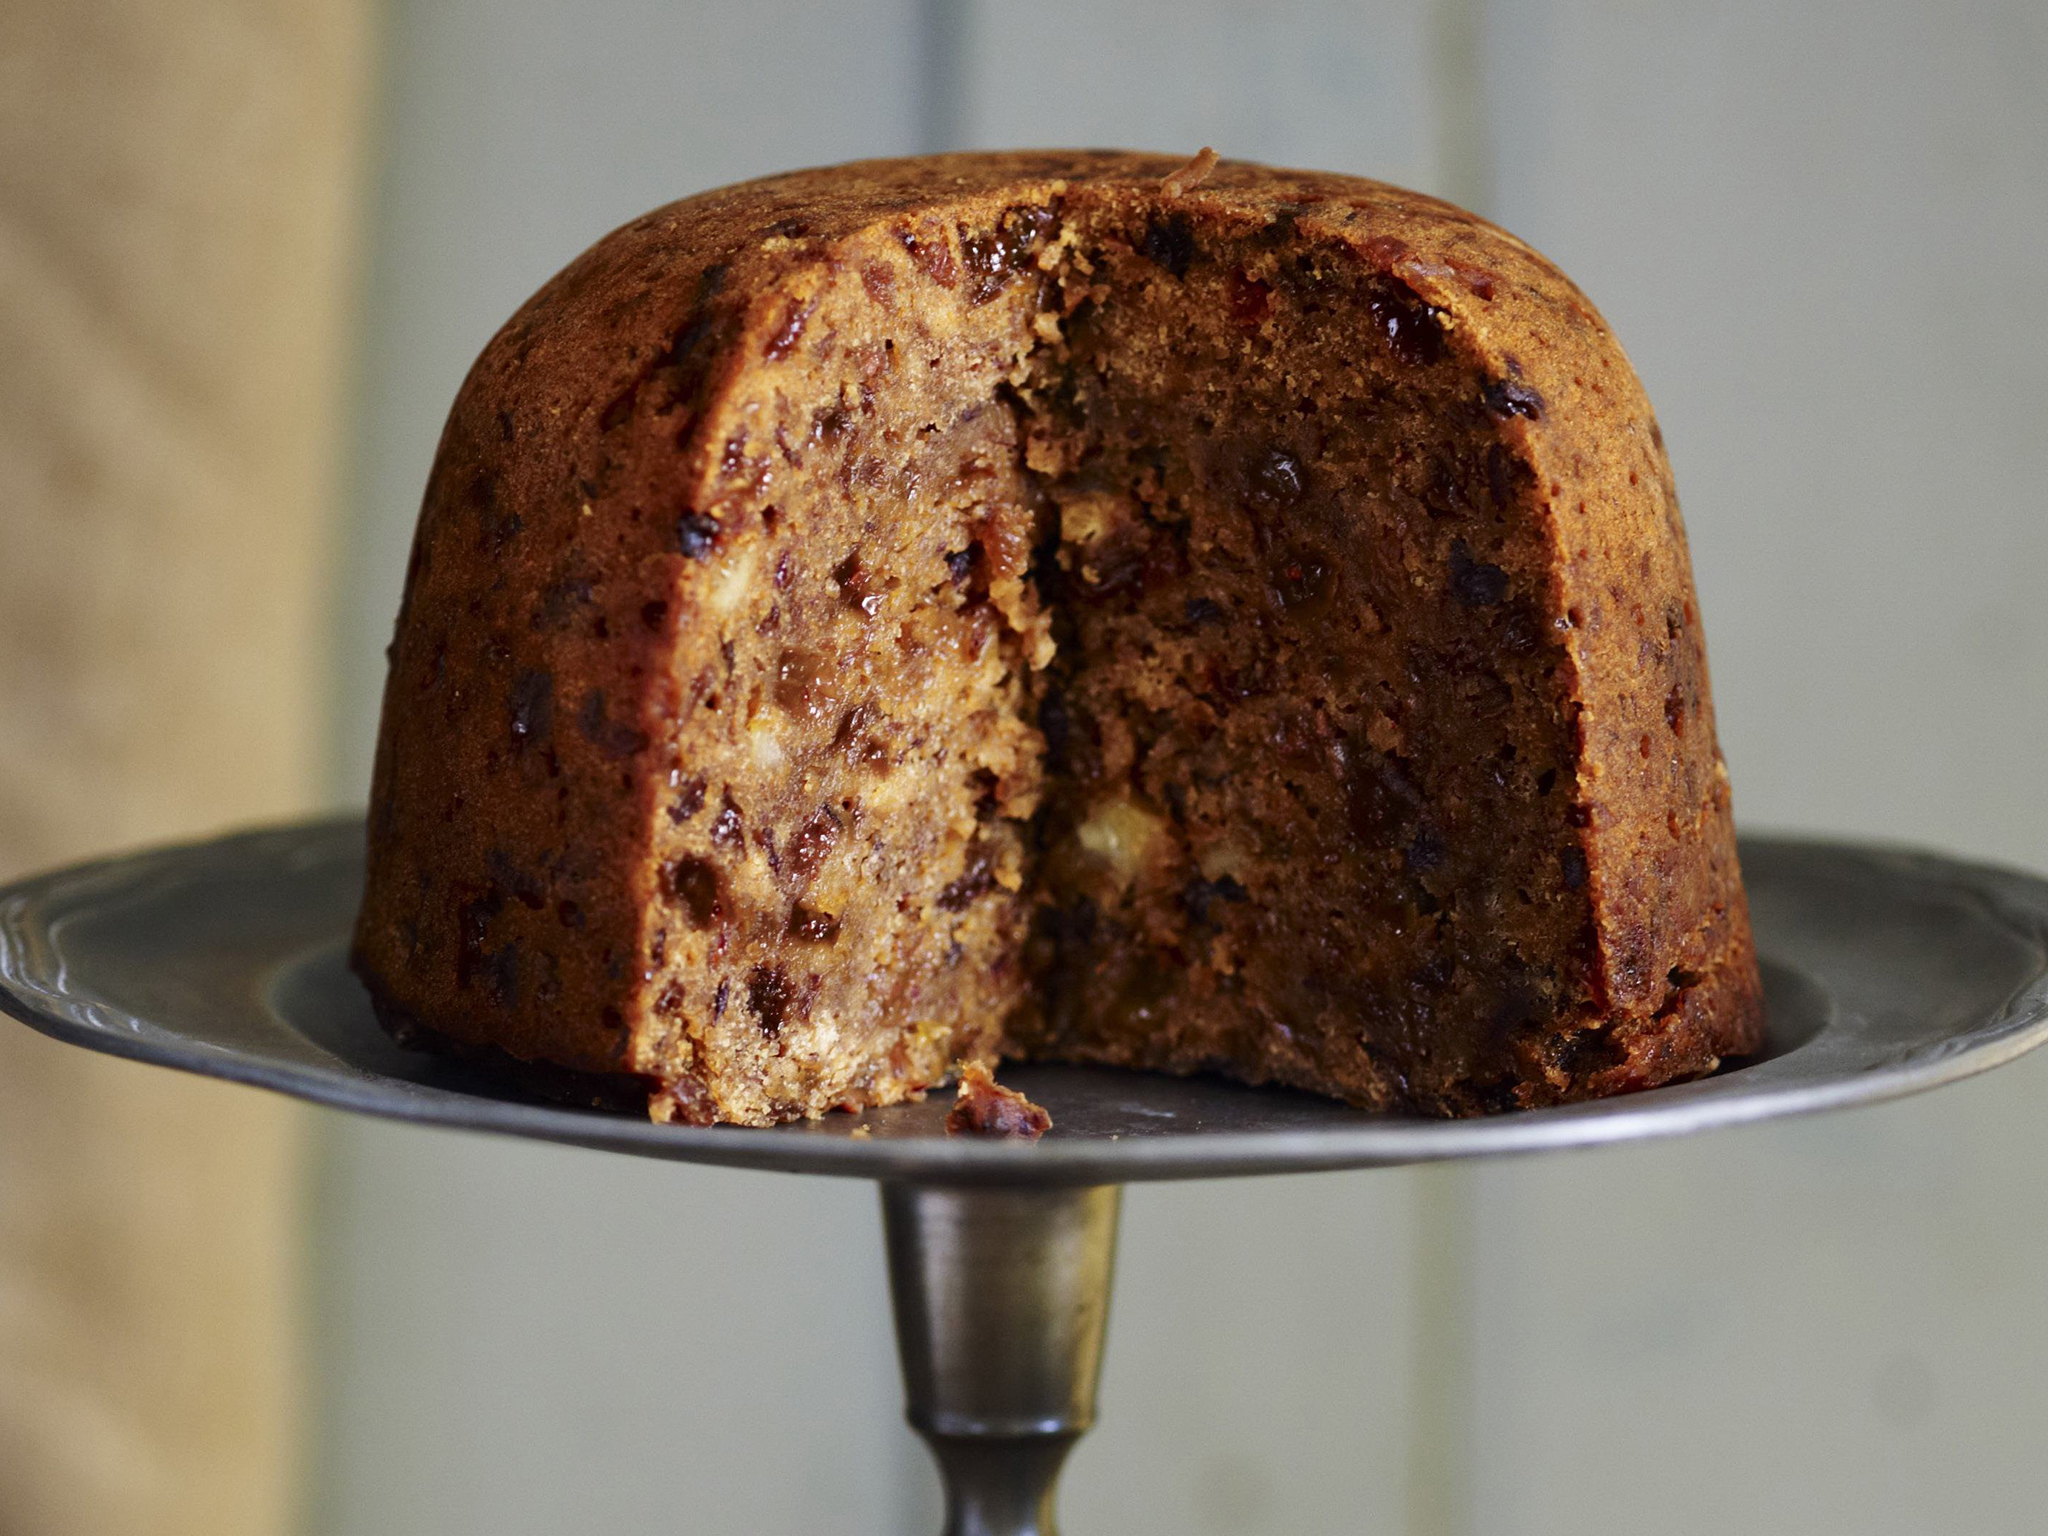 STEAMED PLUM PUDDING